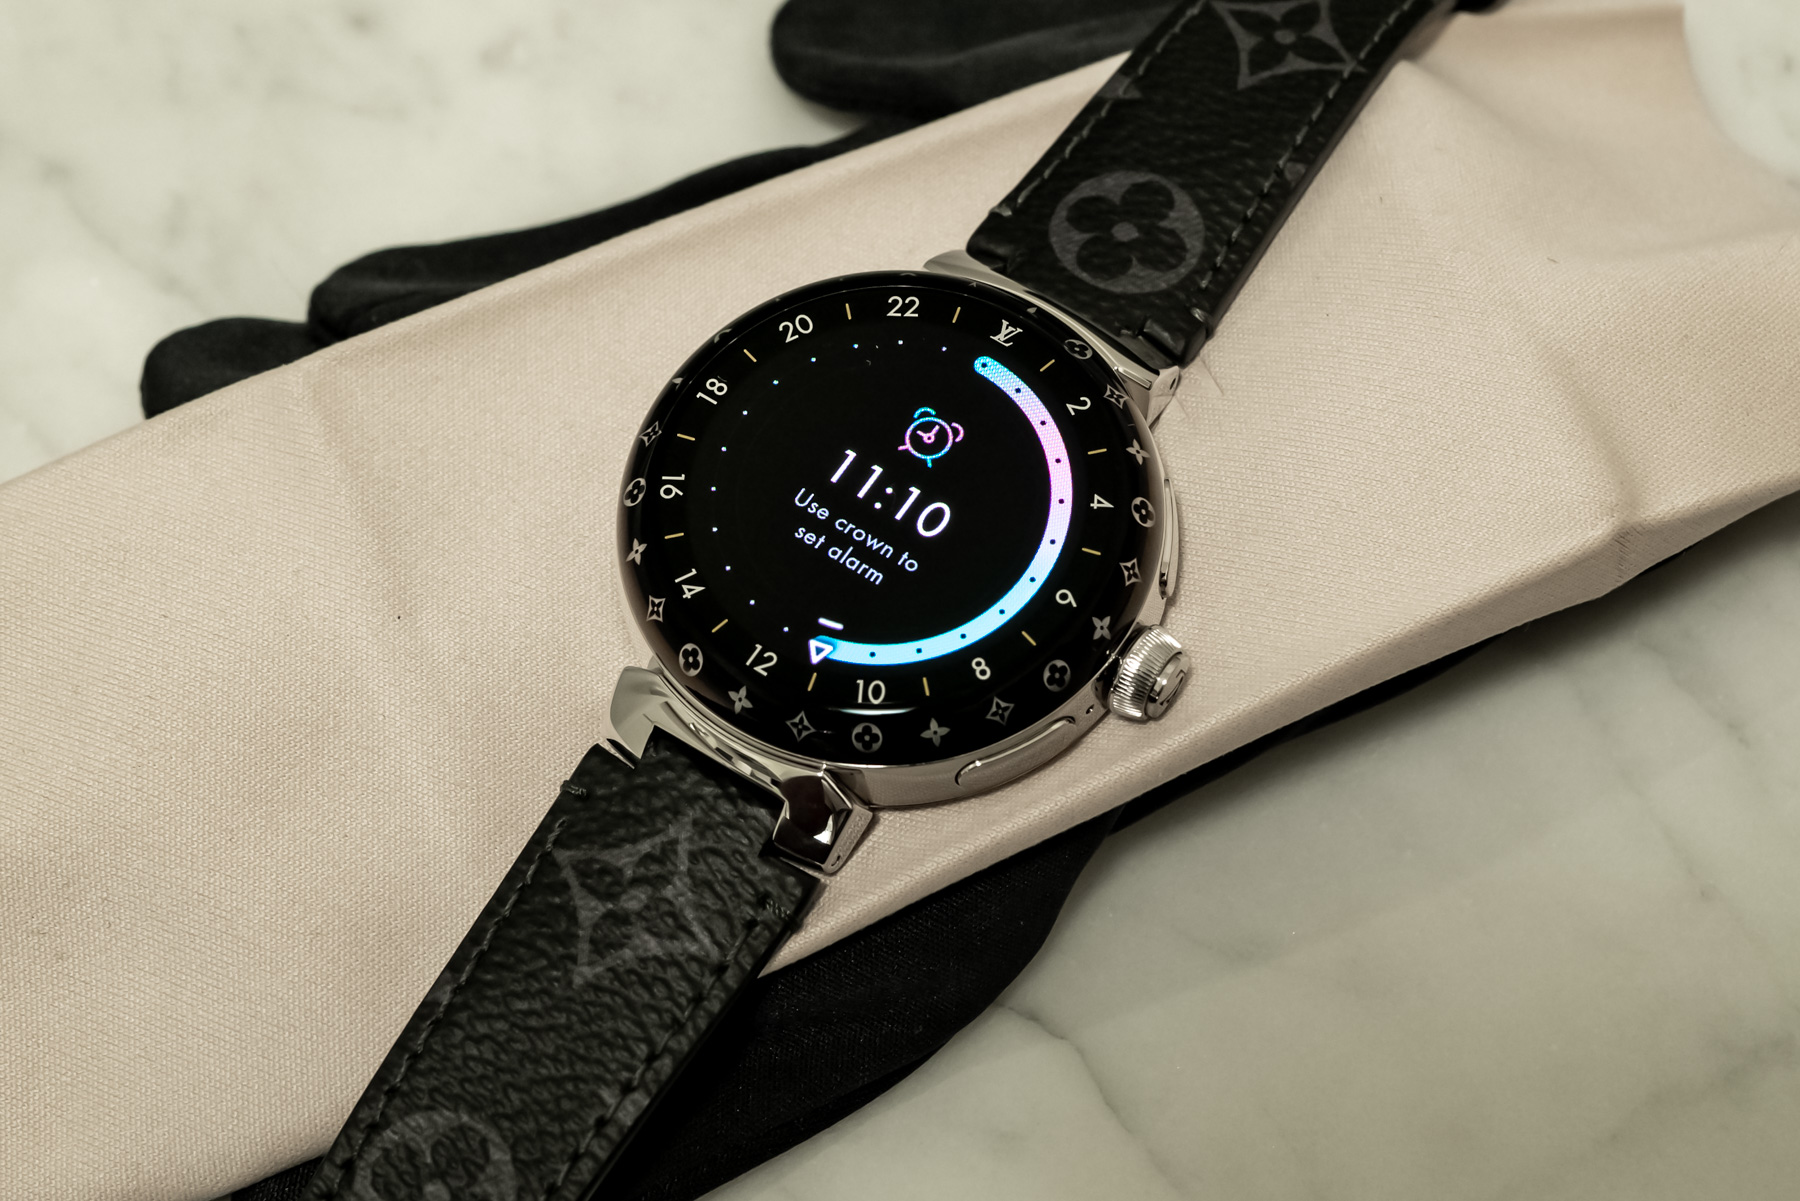 Hands-On With The Louis Vuitton Tambour Horizon Light Up Luxury